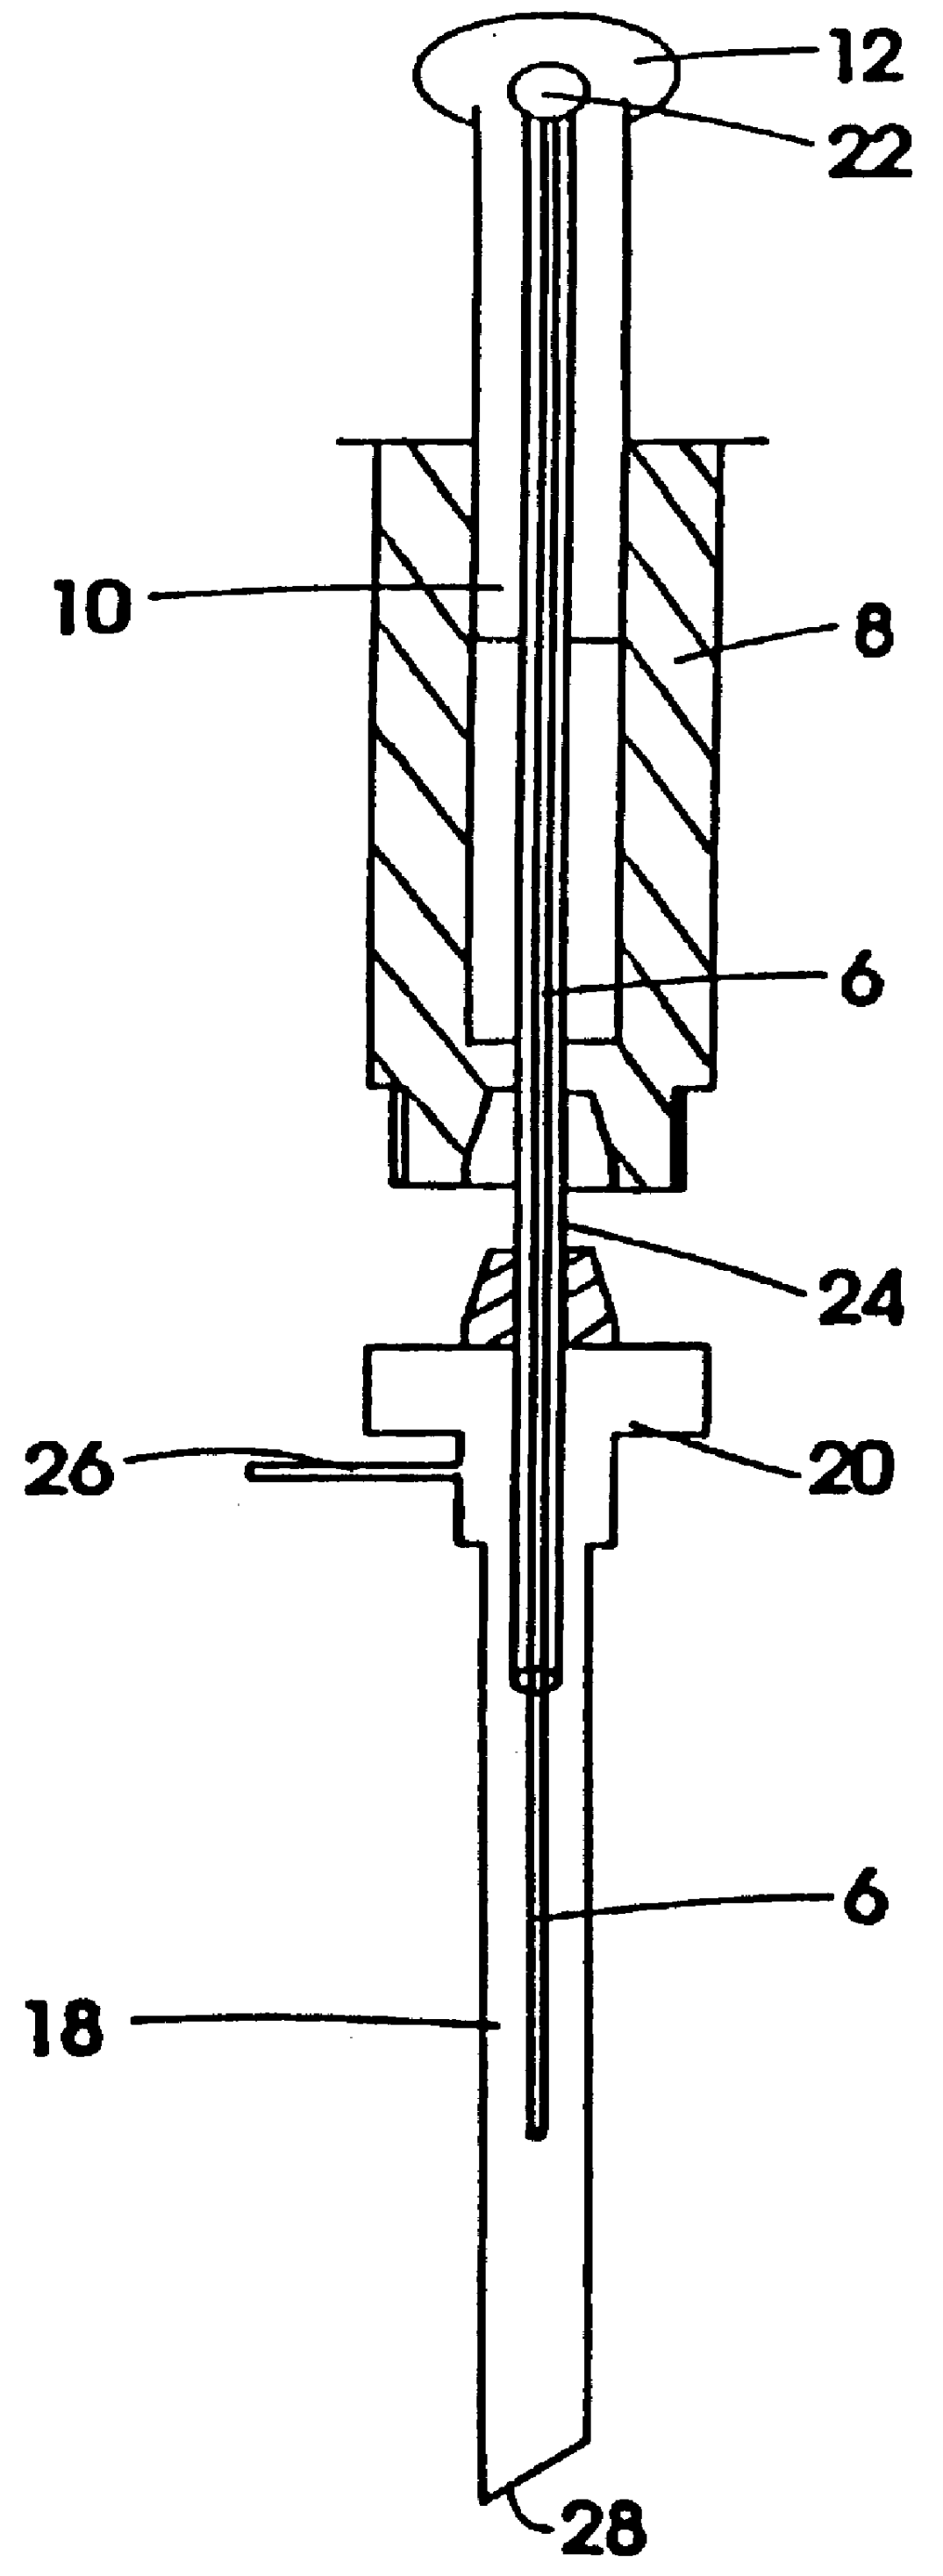 Device for solid phase microextraction and desorption